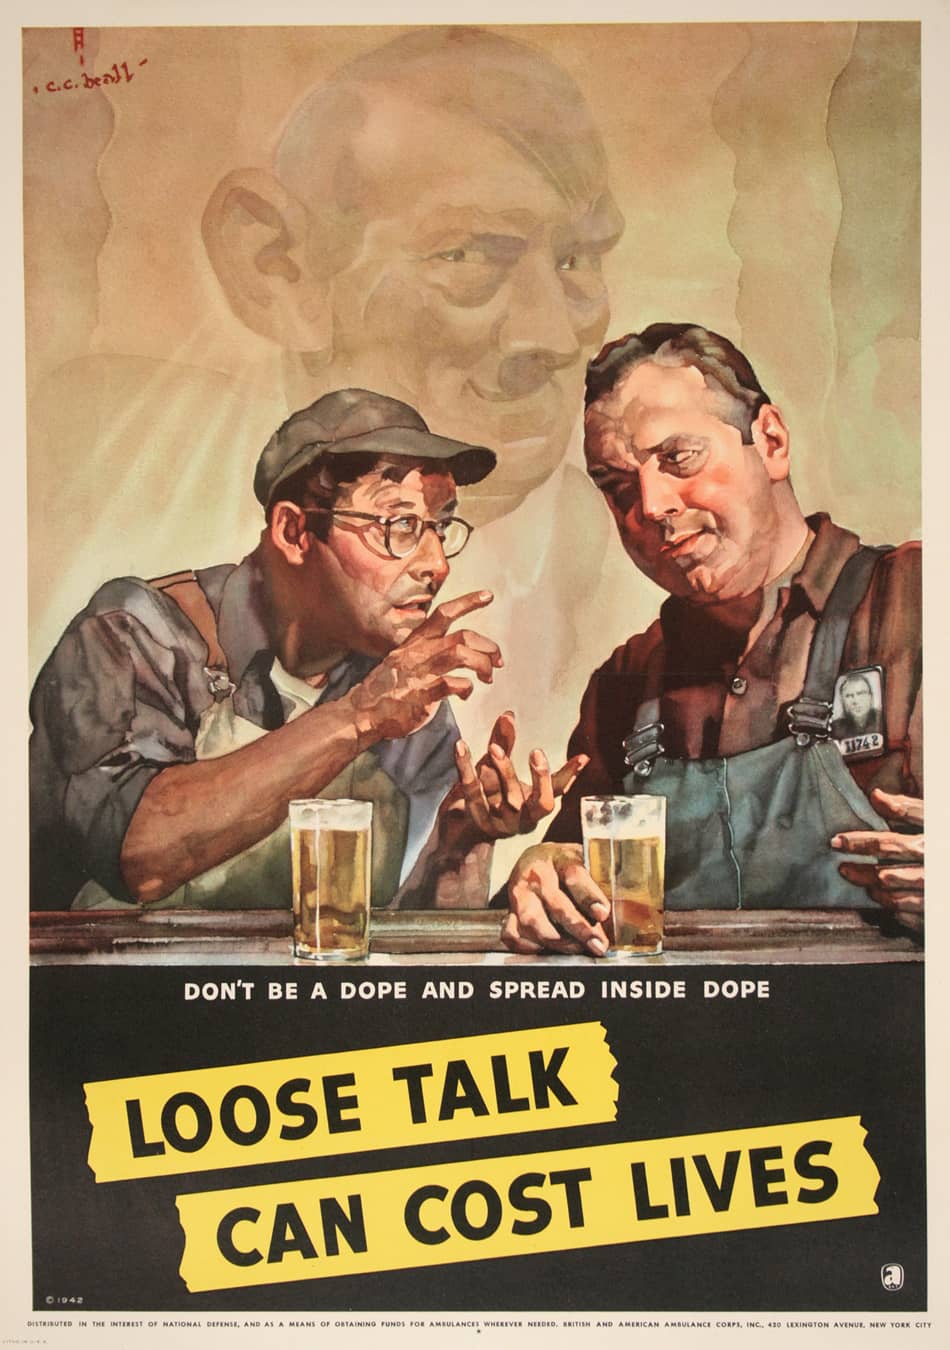 Original world War II Poster - Loose Talk Can Cost Lives - Don't Be A dope by C.C. Beall 1942